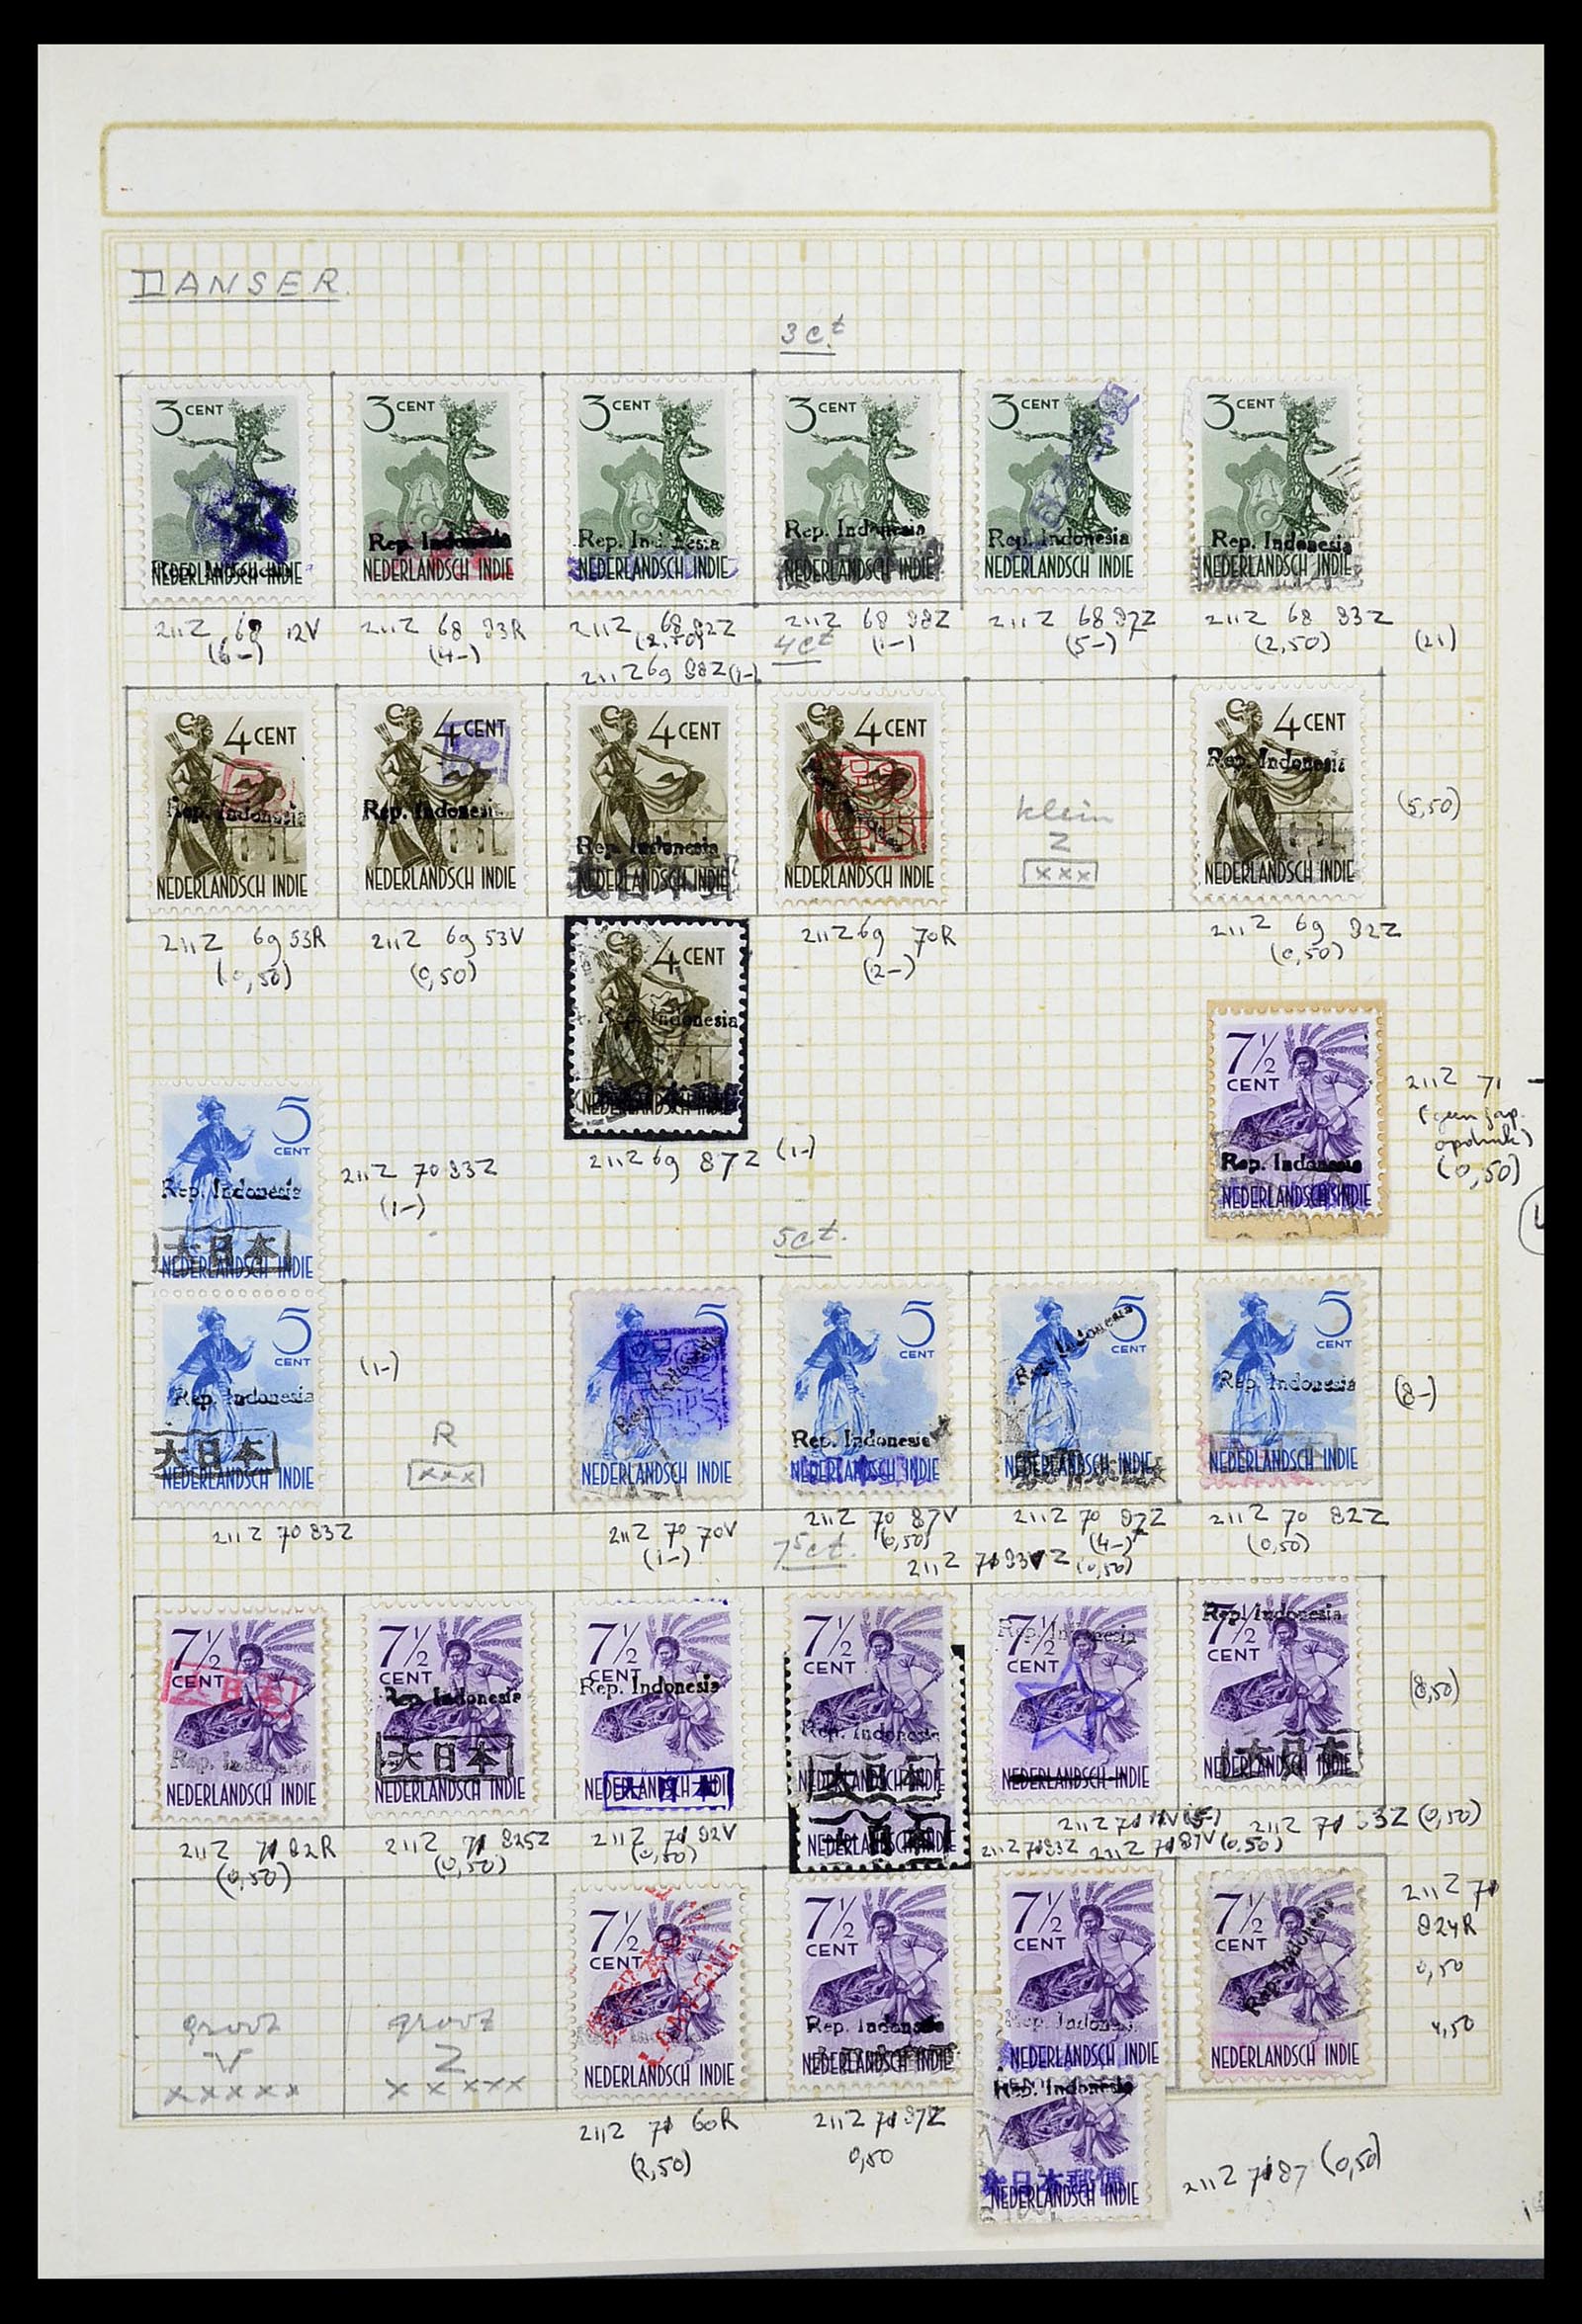 34545 093 - Stamp Collection 34545 Japanese Occupation of the Dutch East Indies and 